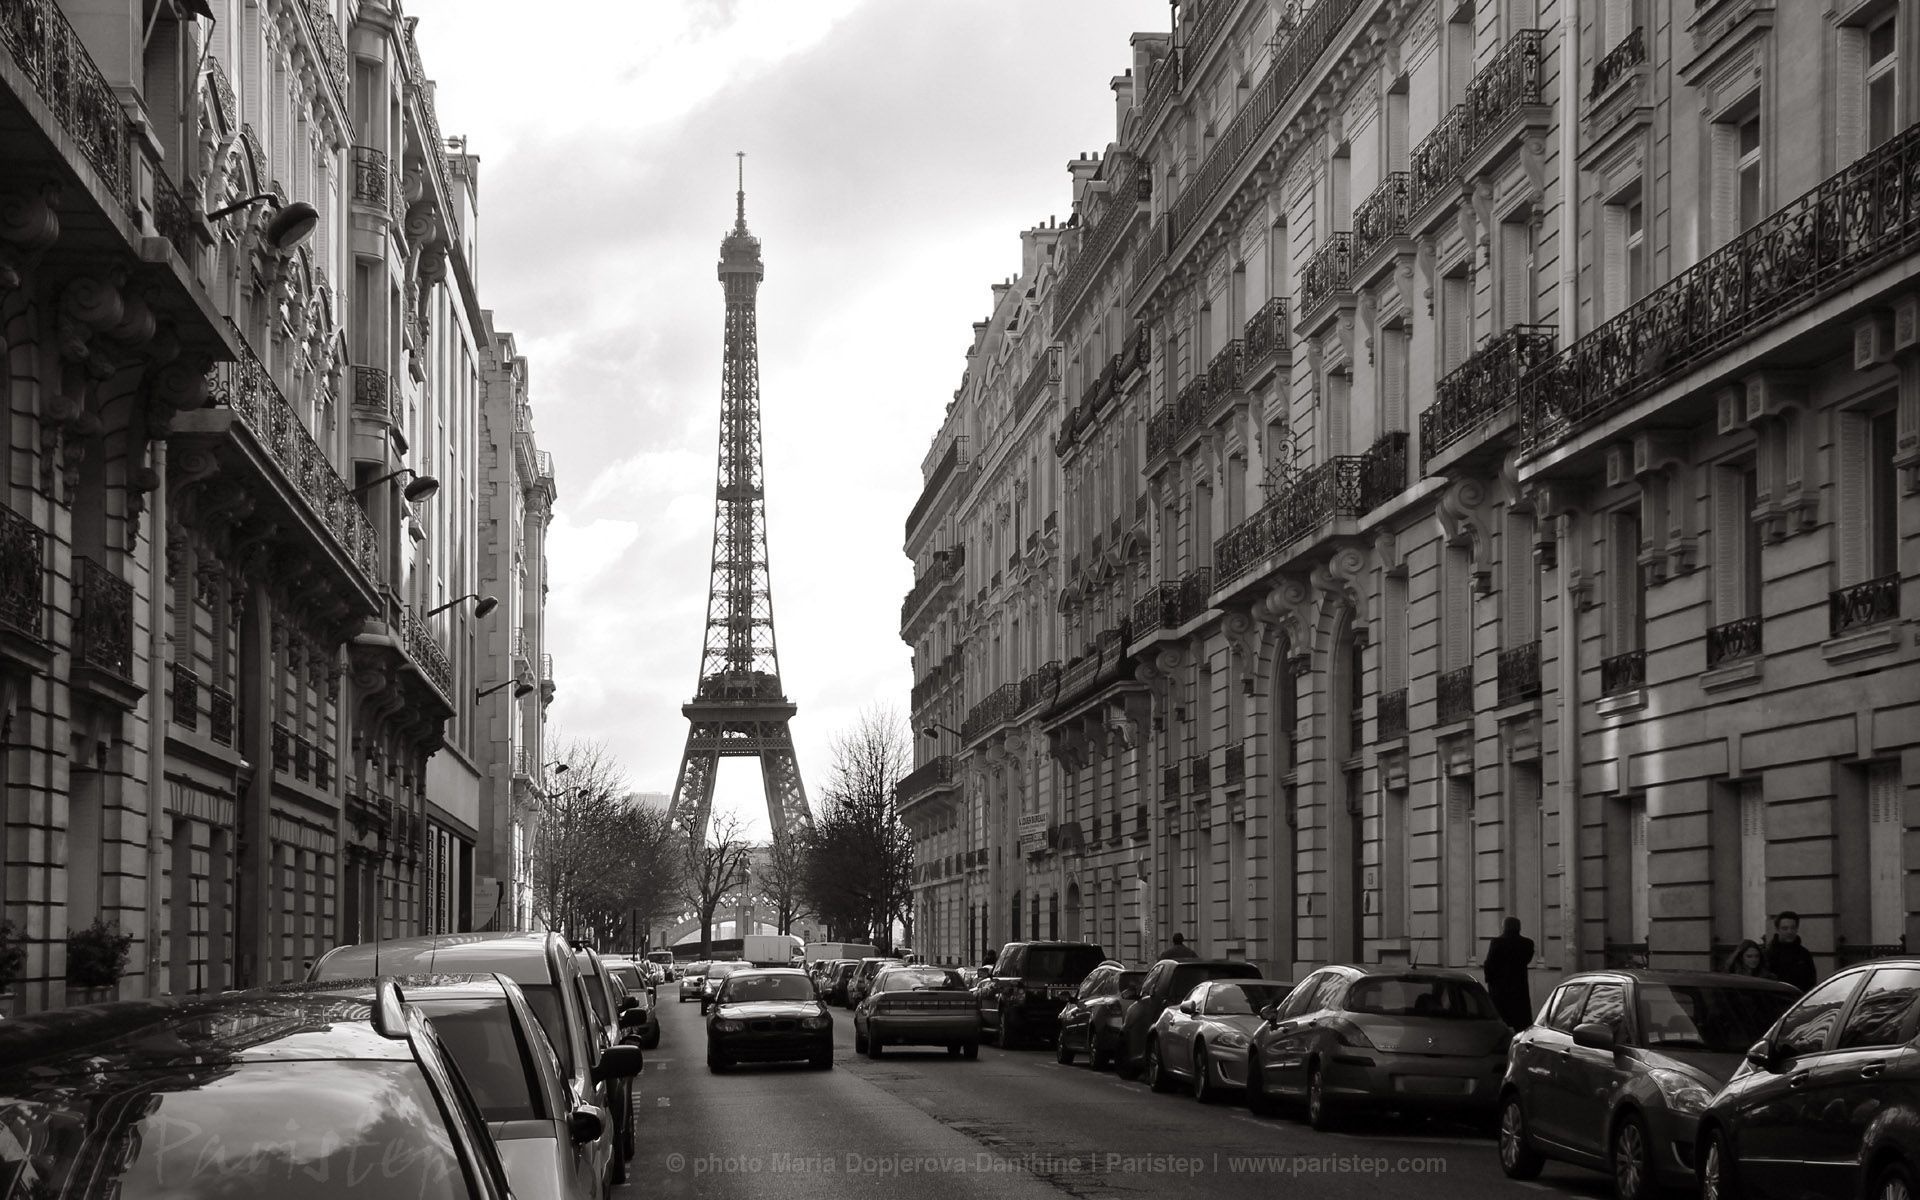 Paris: A leading city in tourism and welcomes approximately 30 million visitors each year of which about 17 million are foreign visitors, Monochrome. 1920x1200 HD Wallpaper.